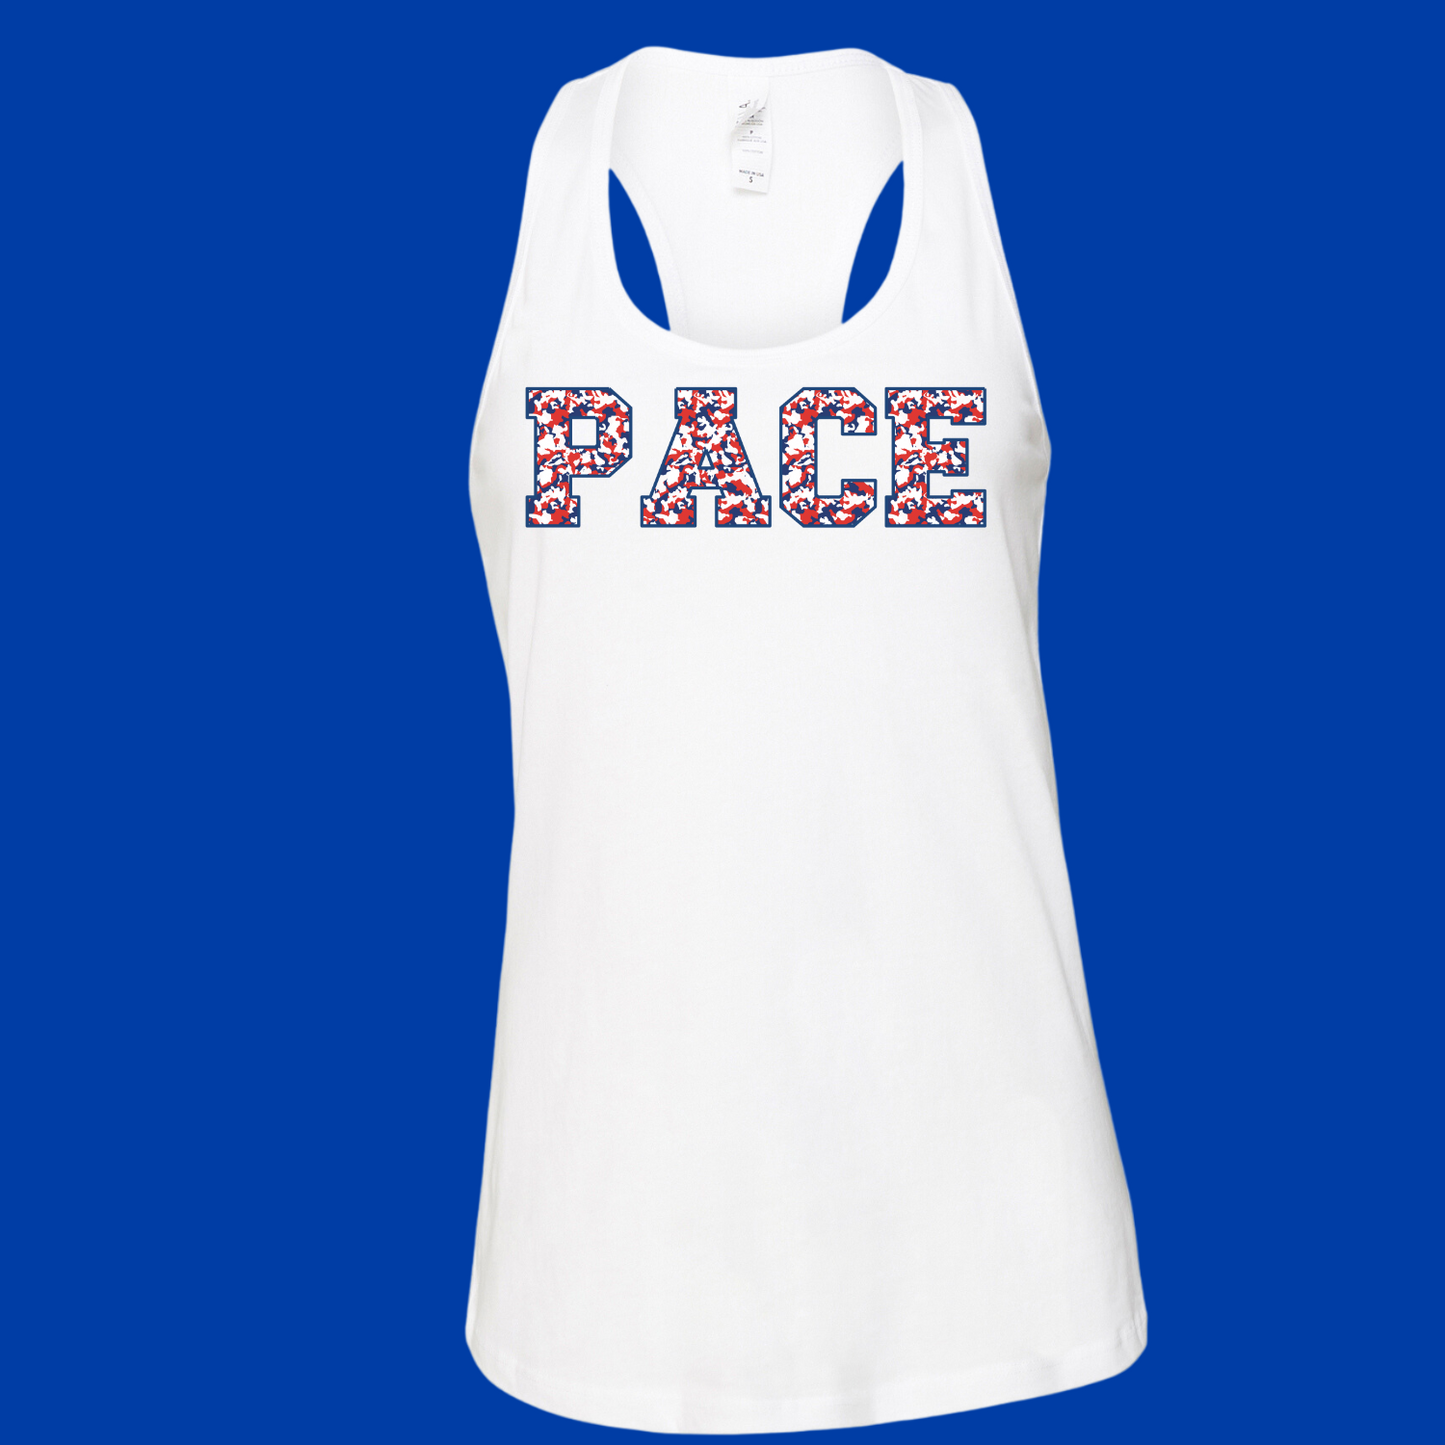 Pace Red + White + Blue Camo Racerback Tank